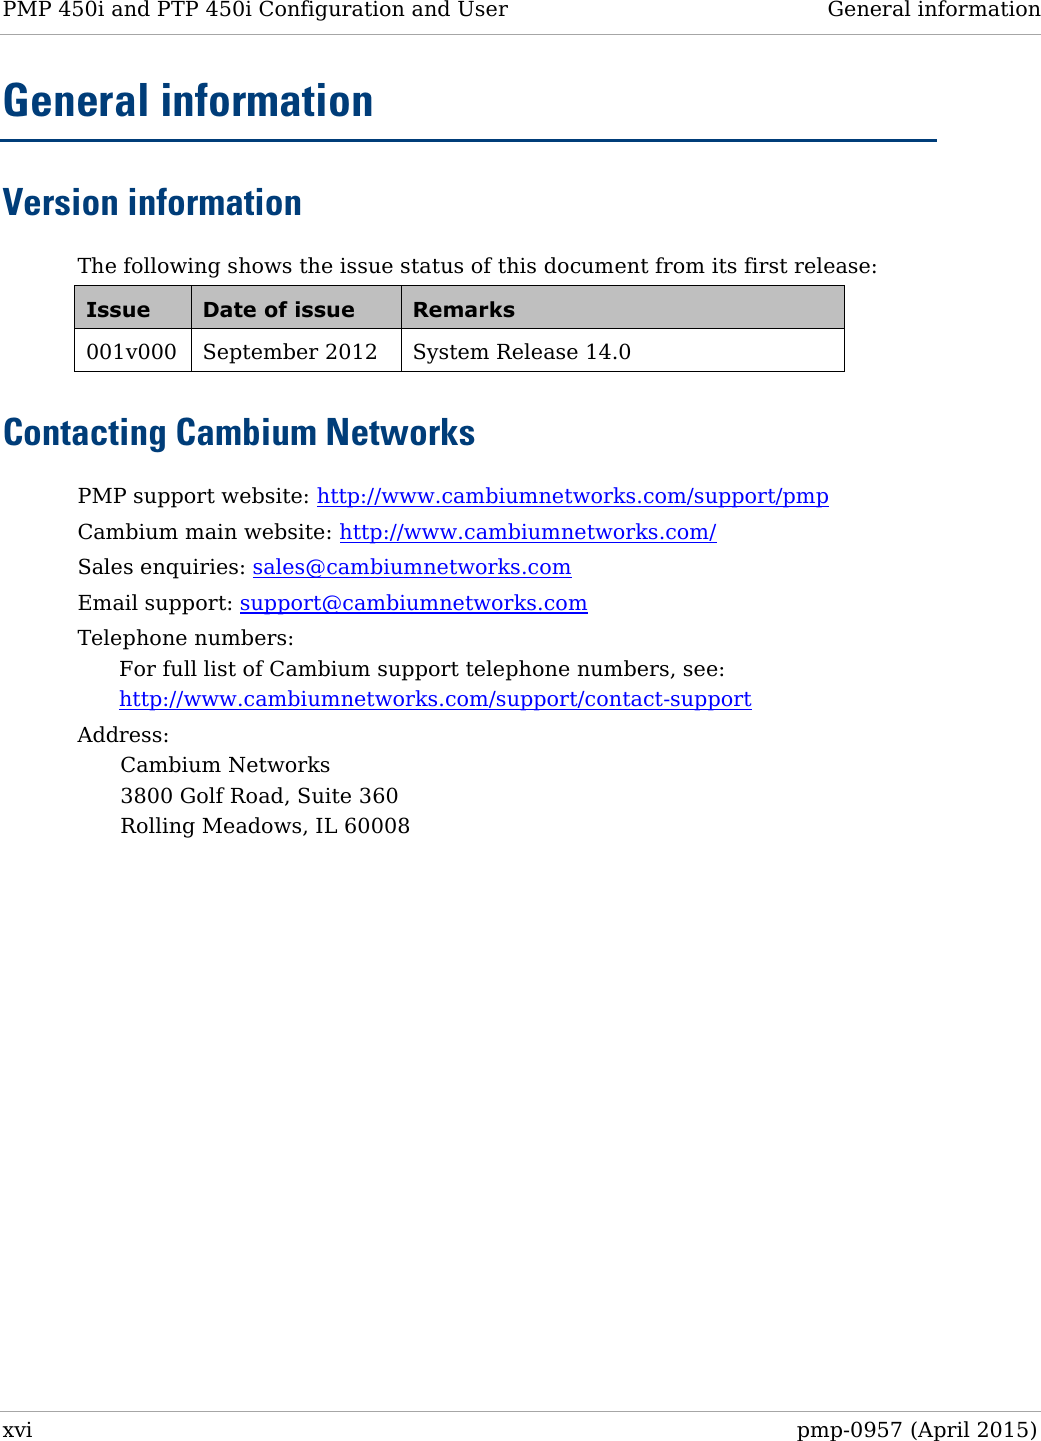 PMP 450i and PTP 450i Configuration and User   General information  General information Version information The following shows the issue status of this document from its first release: Issue Date of issue Remarks 001v000  September 2012 System Release 14.0 Contacting Cambium Networks PMP support website: http://www.cambiumnetworks.com/support/pmp Cambium main website: http://www.cambiumnetworks.com/  Sales enquiries: sales@cambiumnetworks.com Email support: support@cambiumnetworks.com Telephone numbers: For full list of Cambium support telephone numbers, see: http://www.cambiumnetworks.com/support/contact-support Address: Cambium Networks 3800 Golf Road, Suite 360 Rolling Meadows, IL 60008   xvi  pmp-0957 (April 2015)  